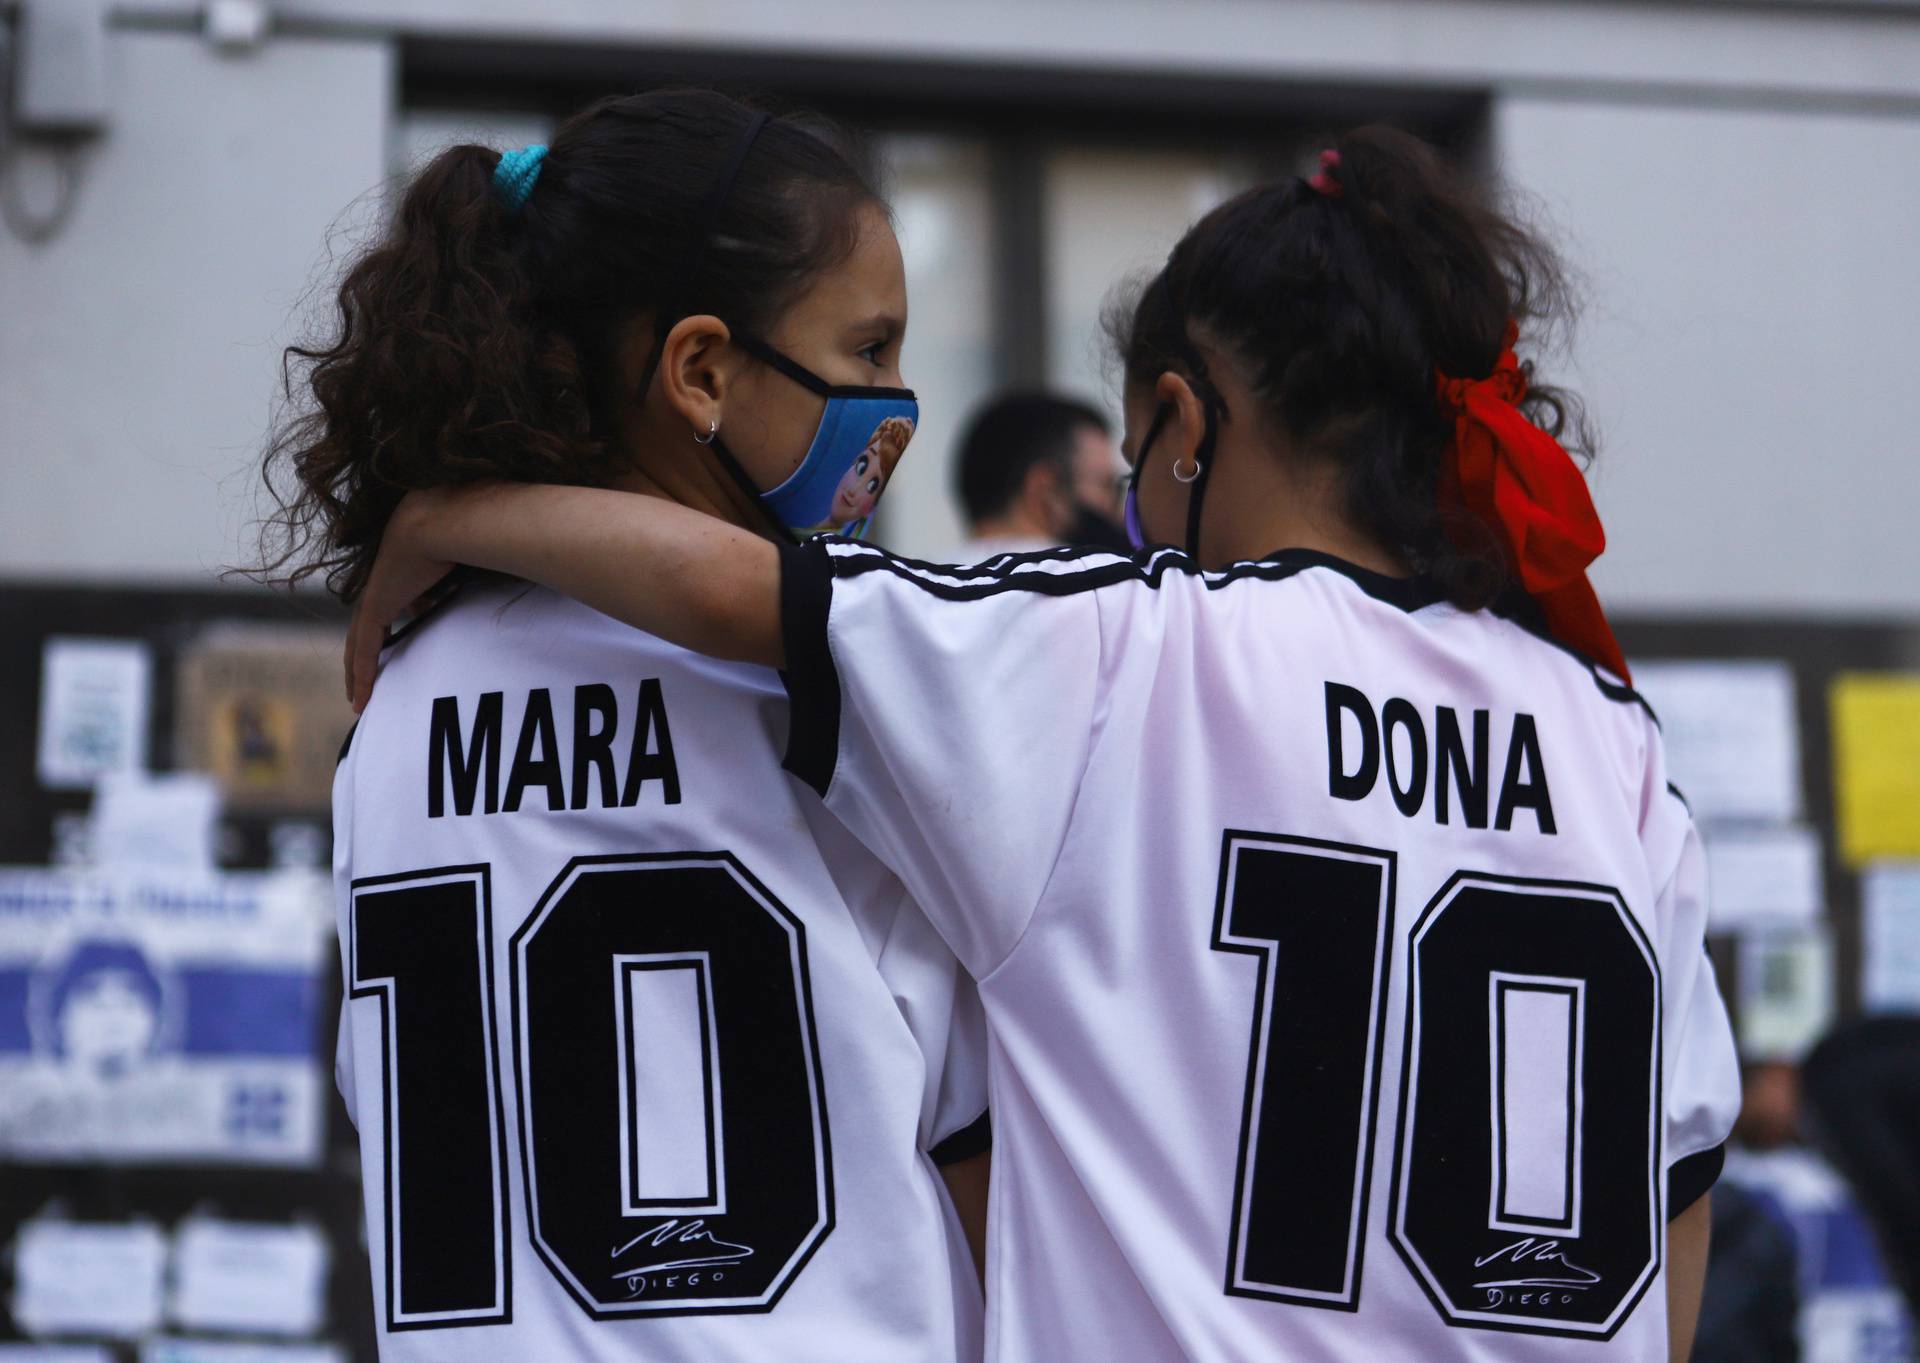 Twin sisters Mara and Dona Rotundo, fans of Argentine soccer great Diego Maradona and who are named after him, embrace outside the clinic where Maradona underwent brain surgery, in Olivos